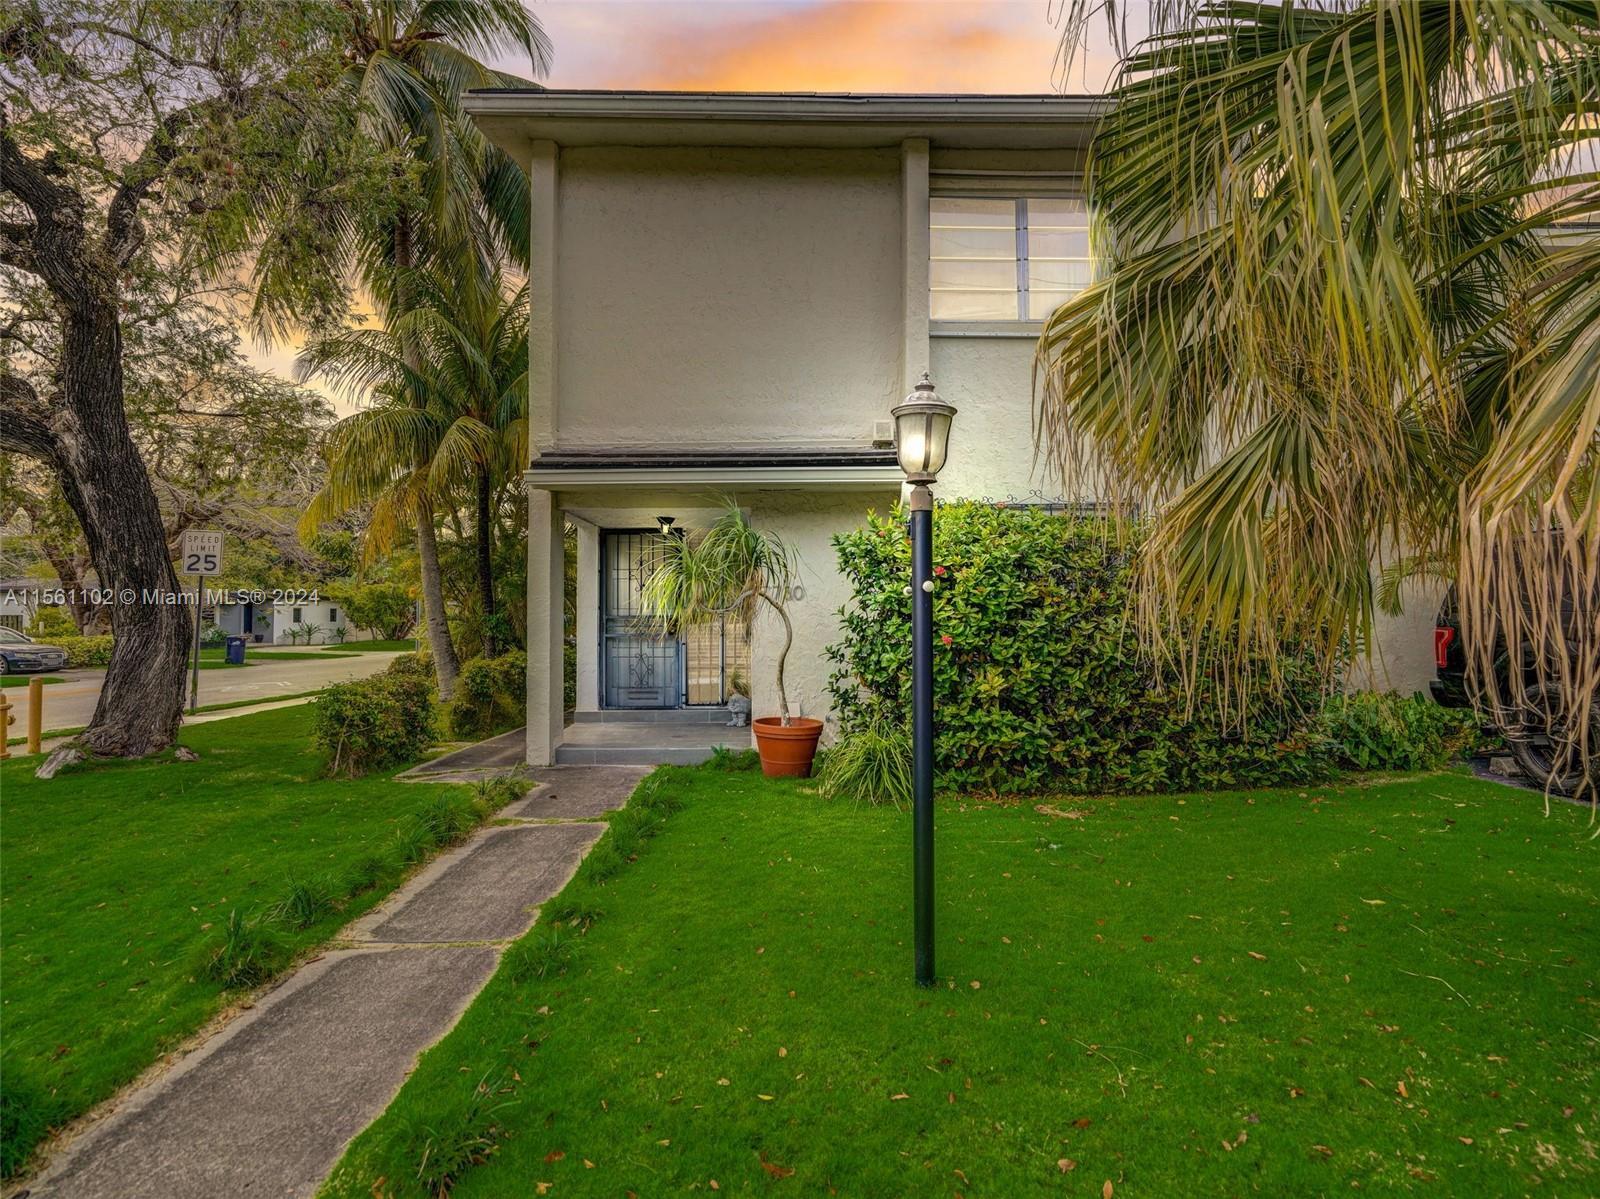 Introducing a charming corner-lot townhome condo in South Miami. This 2-story residence boasts 1554 